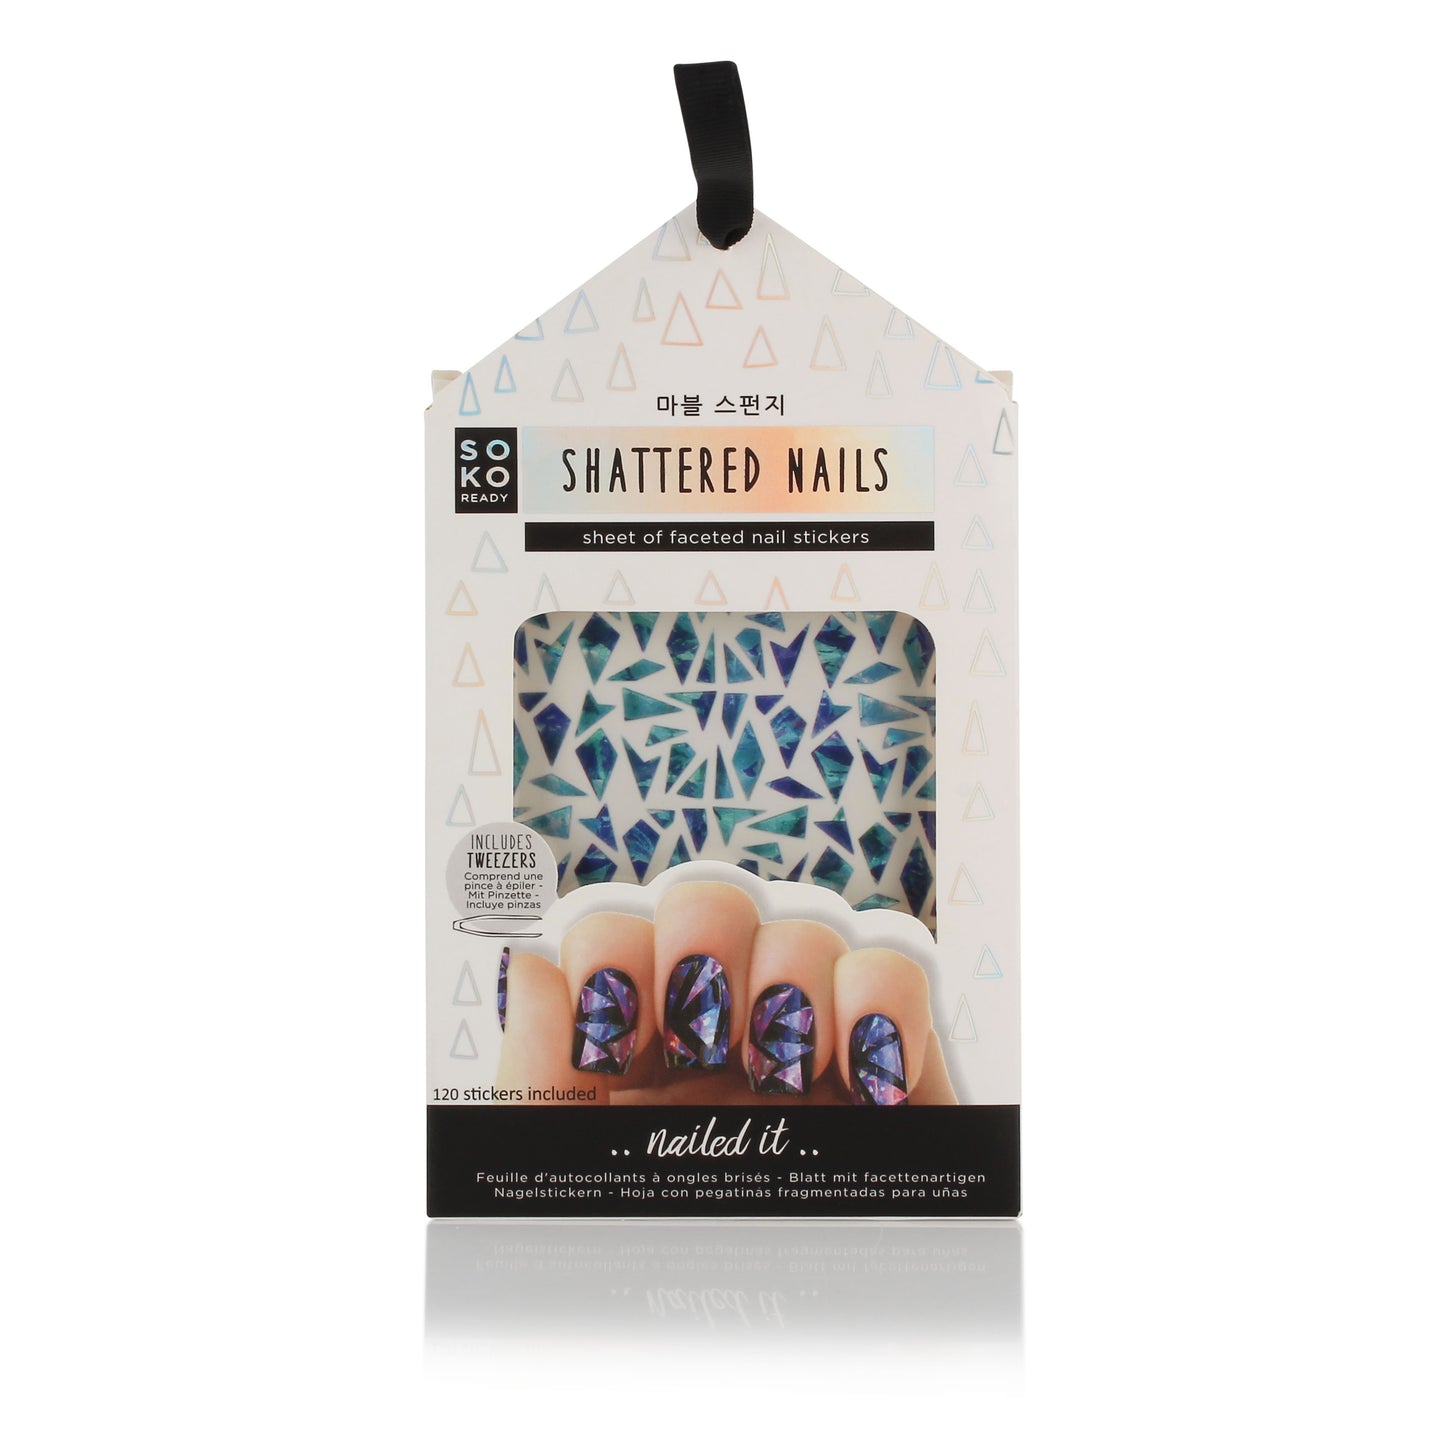 Oh K! Shattered Nails Sheet 120 Faceted Nail Stickers & Nail Tweez